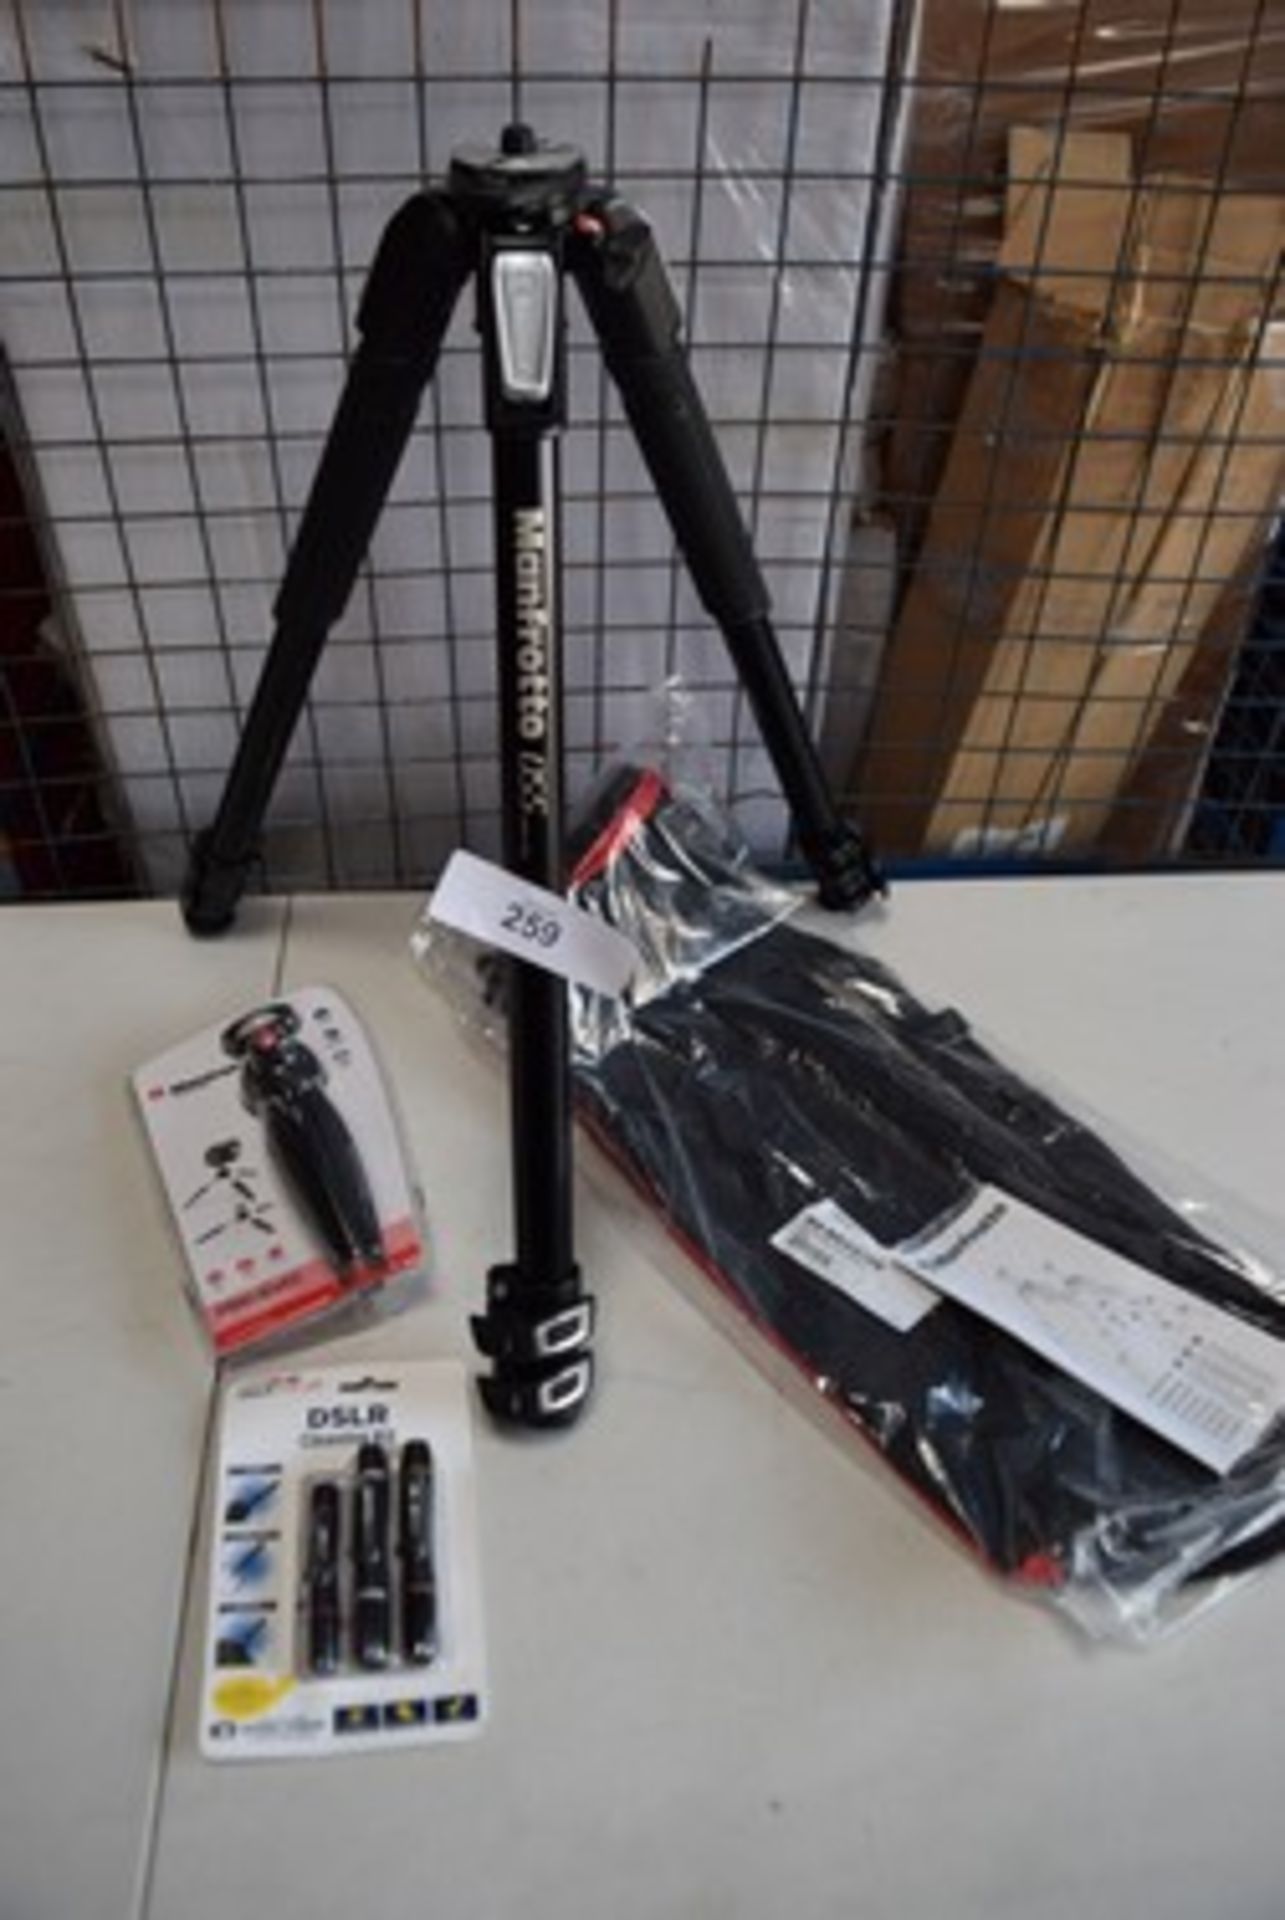 1 x Manfrotto 055 aluminium tripod with horizontal column, item No: MT055XPRO3, together with 1 x